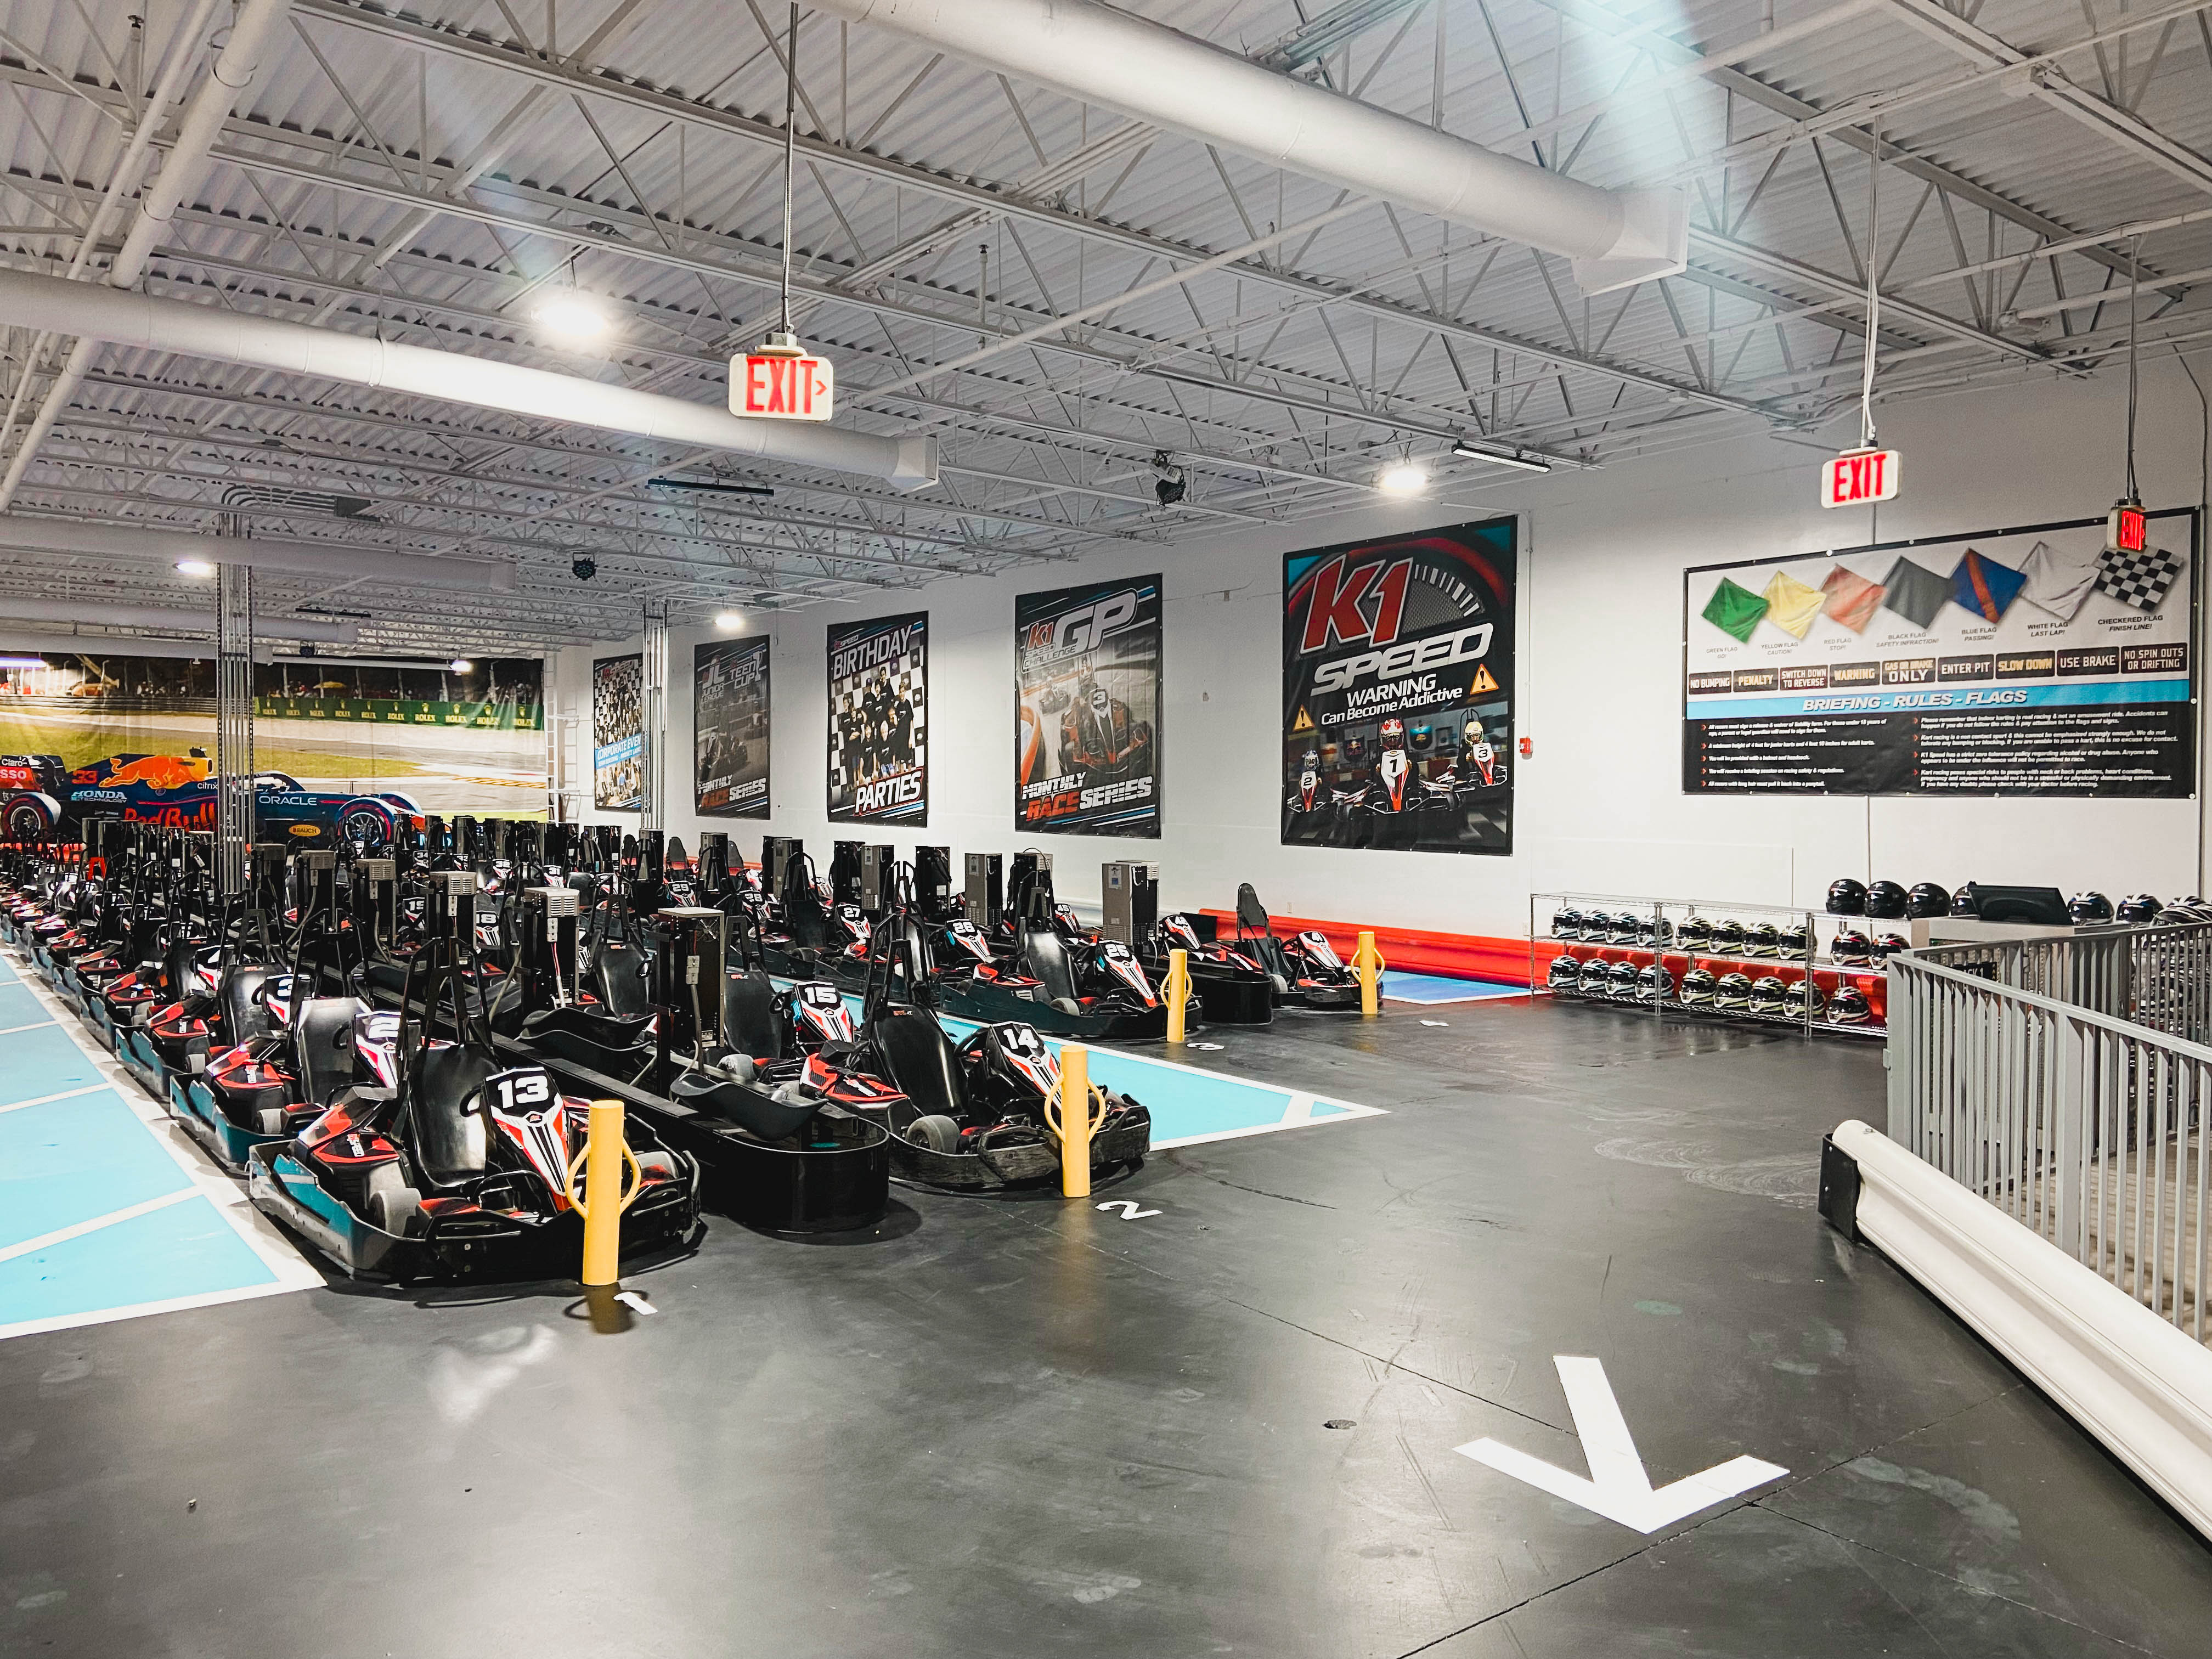 Rows of all-electric go karts for juniors and adults fill the pits inside K1 Speed Richmond